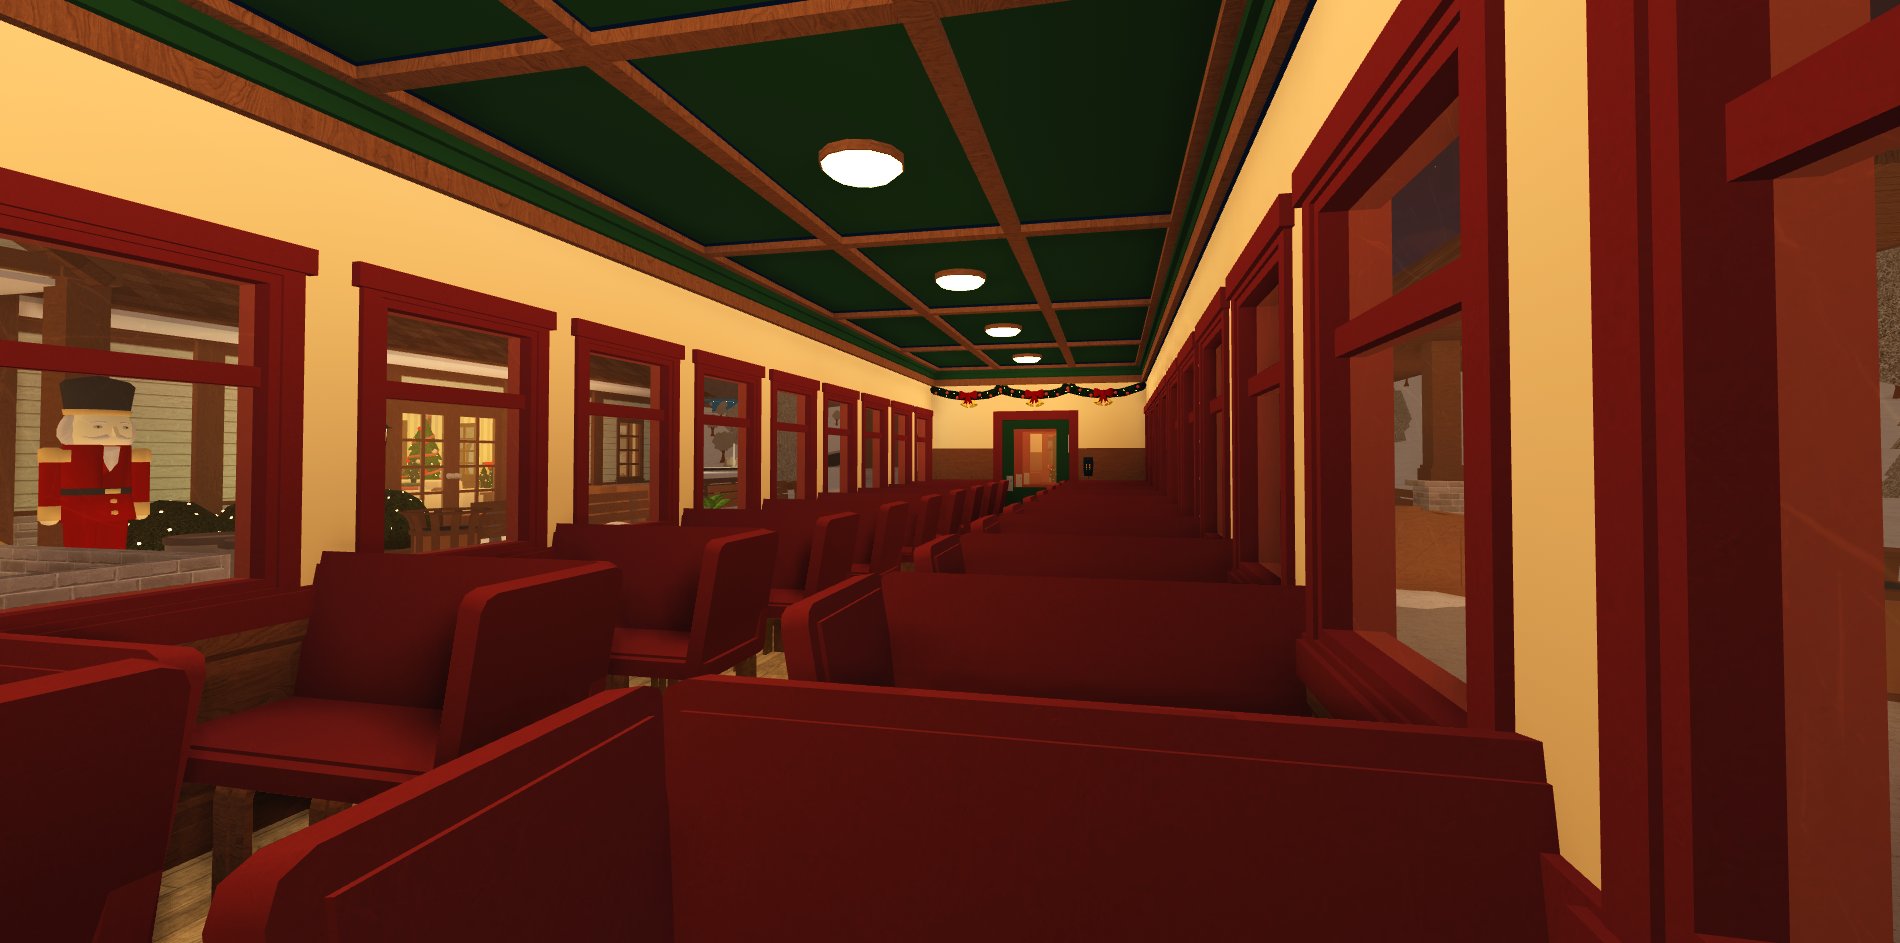 Froggyhopz On Twitter Grab A Ticket And Hot Chocolate Then Hop Aboard This Christmas Eve We Are Heading To The North Pole Aboard Bloxburg S Own Polar Express The Historic Train Station - the polar express trip soon take us ticket roblox